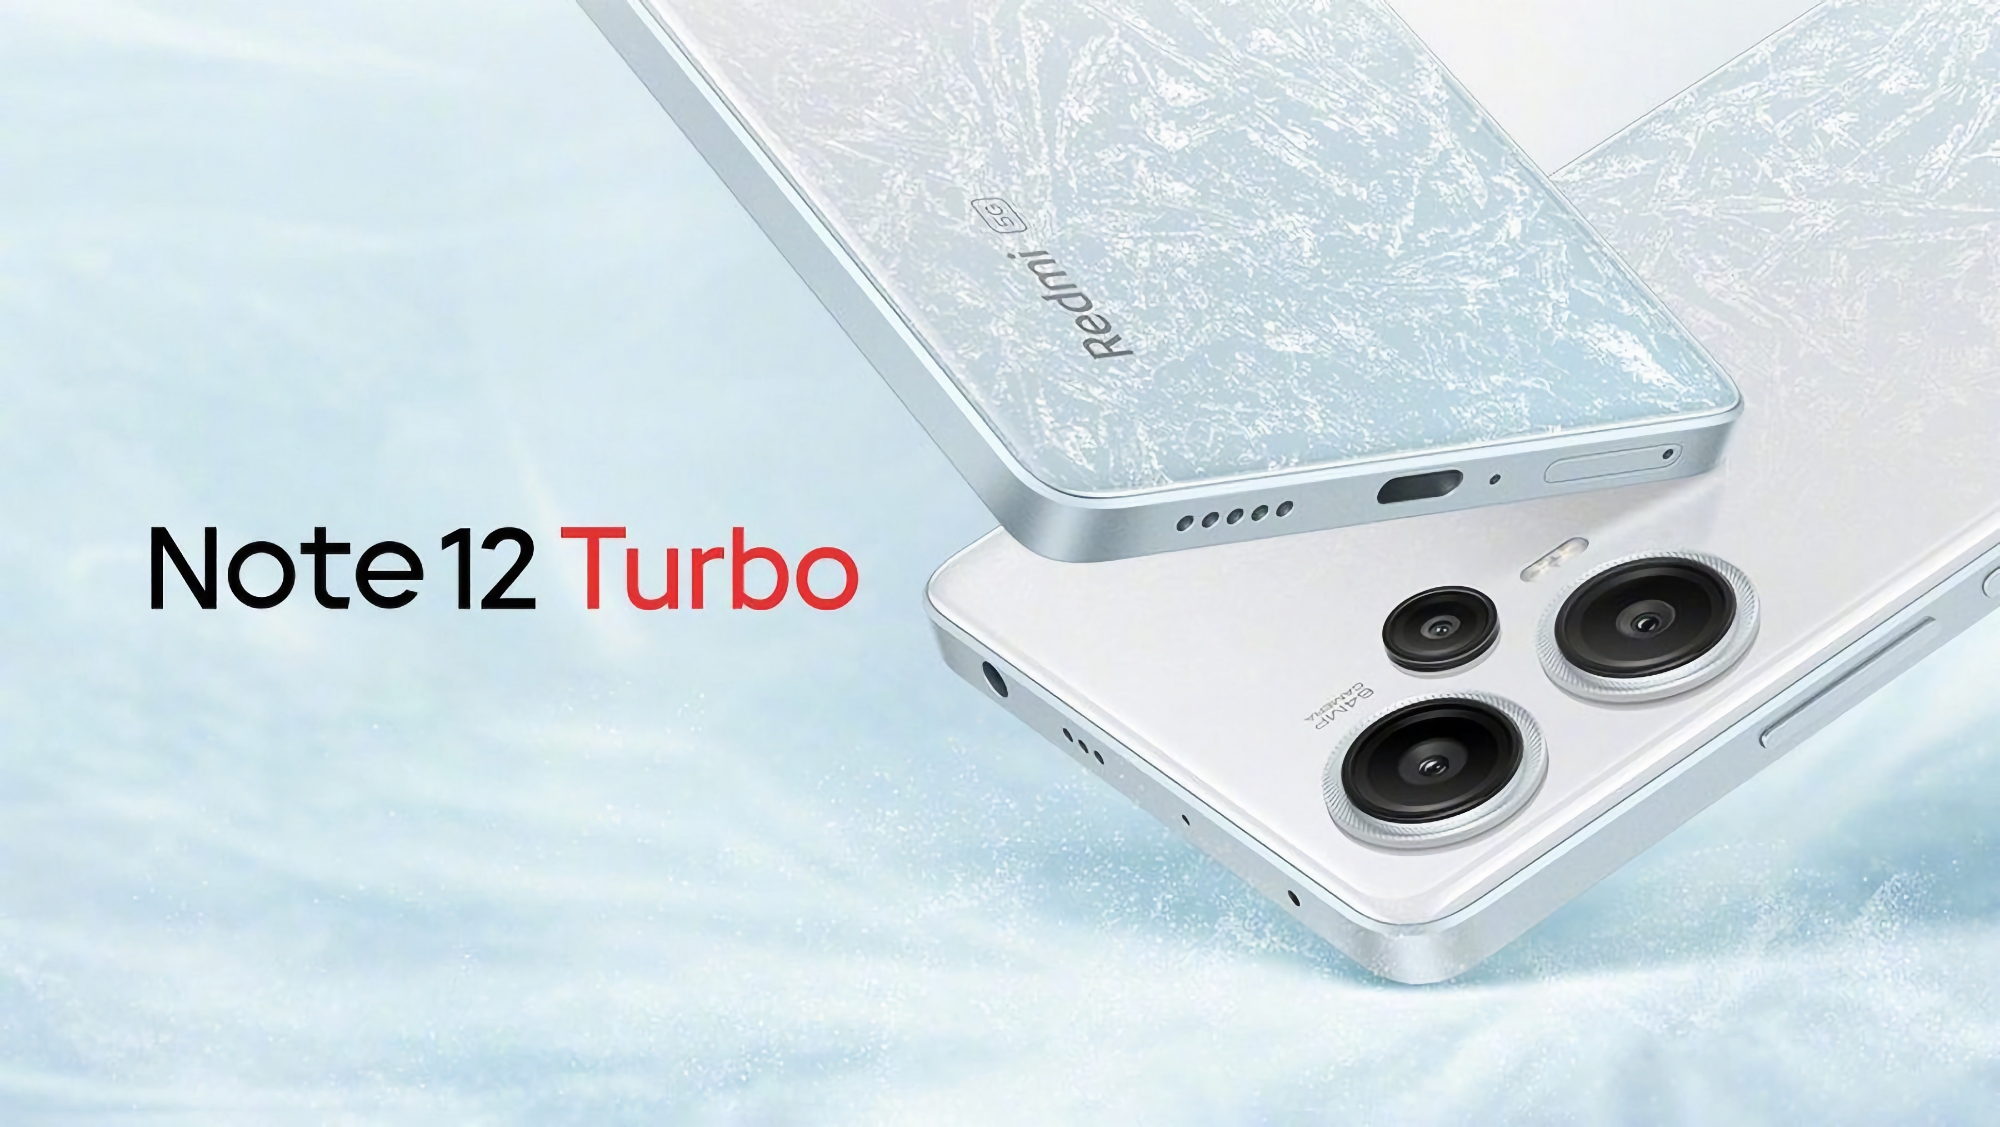 Redmi Note 12 Turbo has started receiving HyperOS